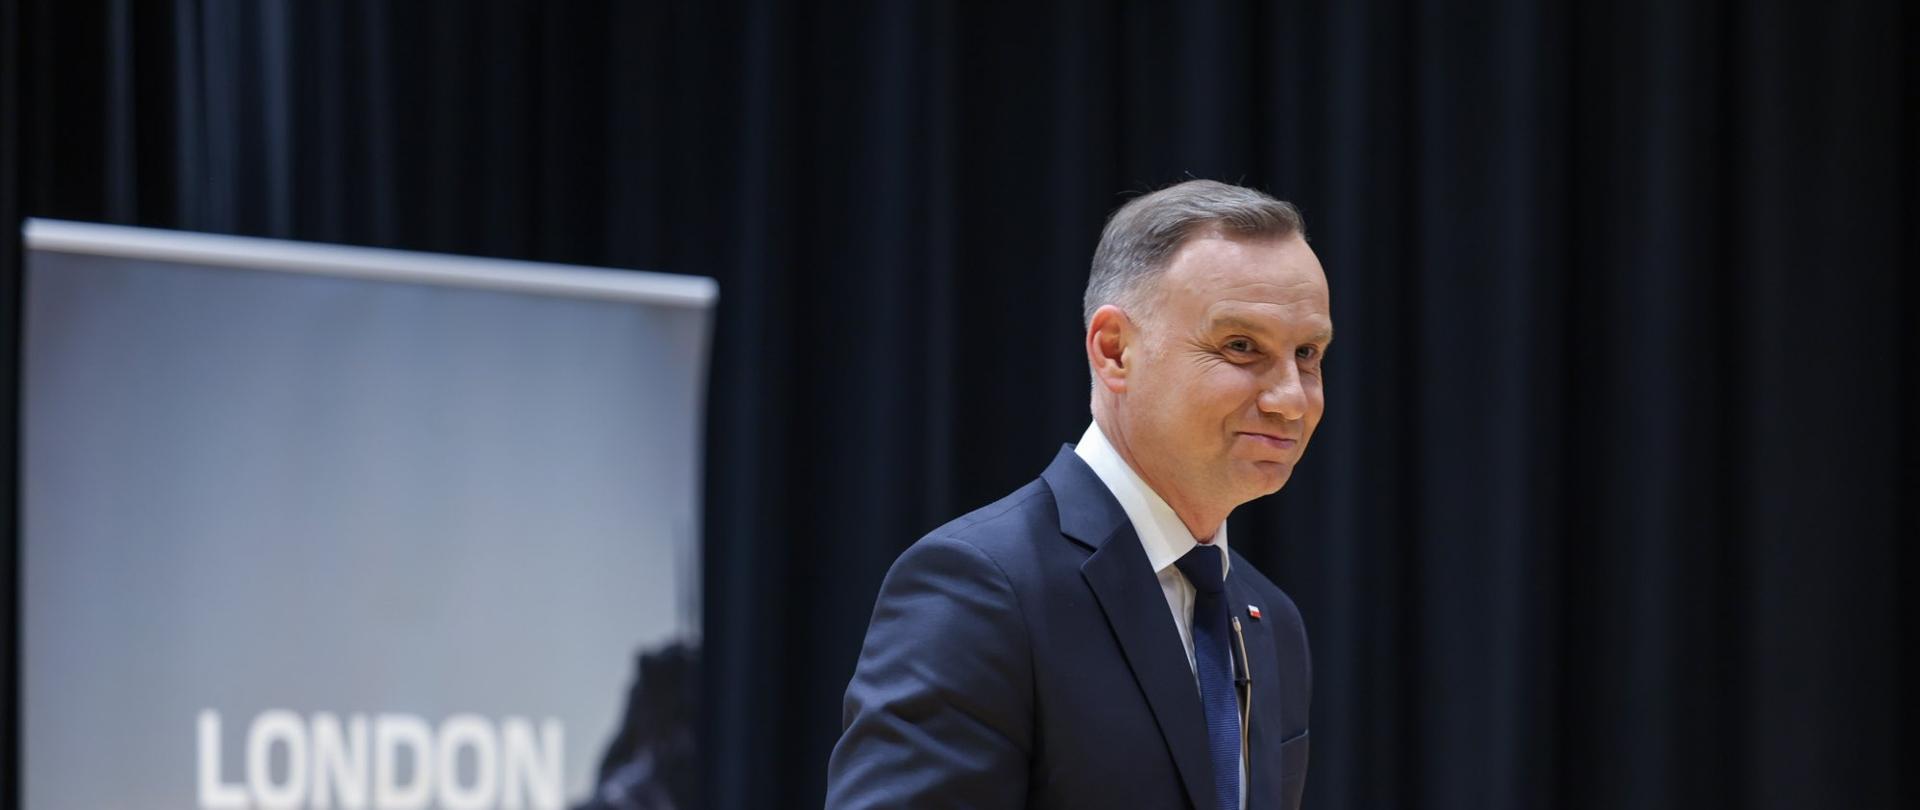 President Andrzej Duda at the London Defence Conference